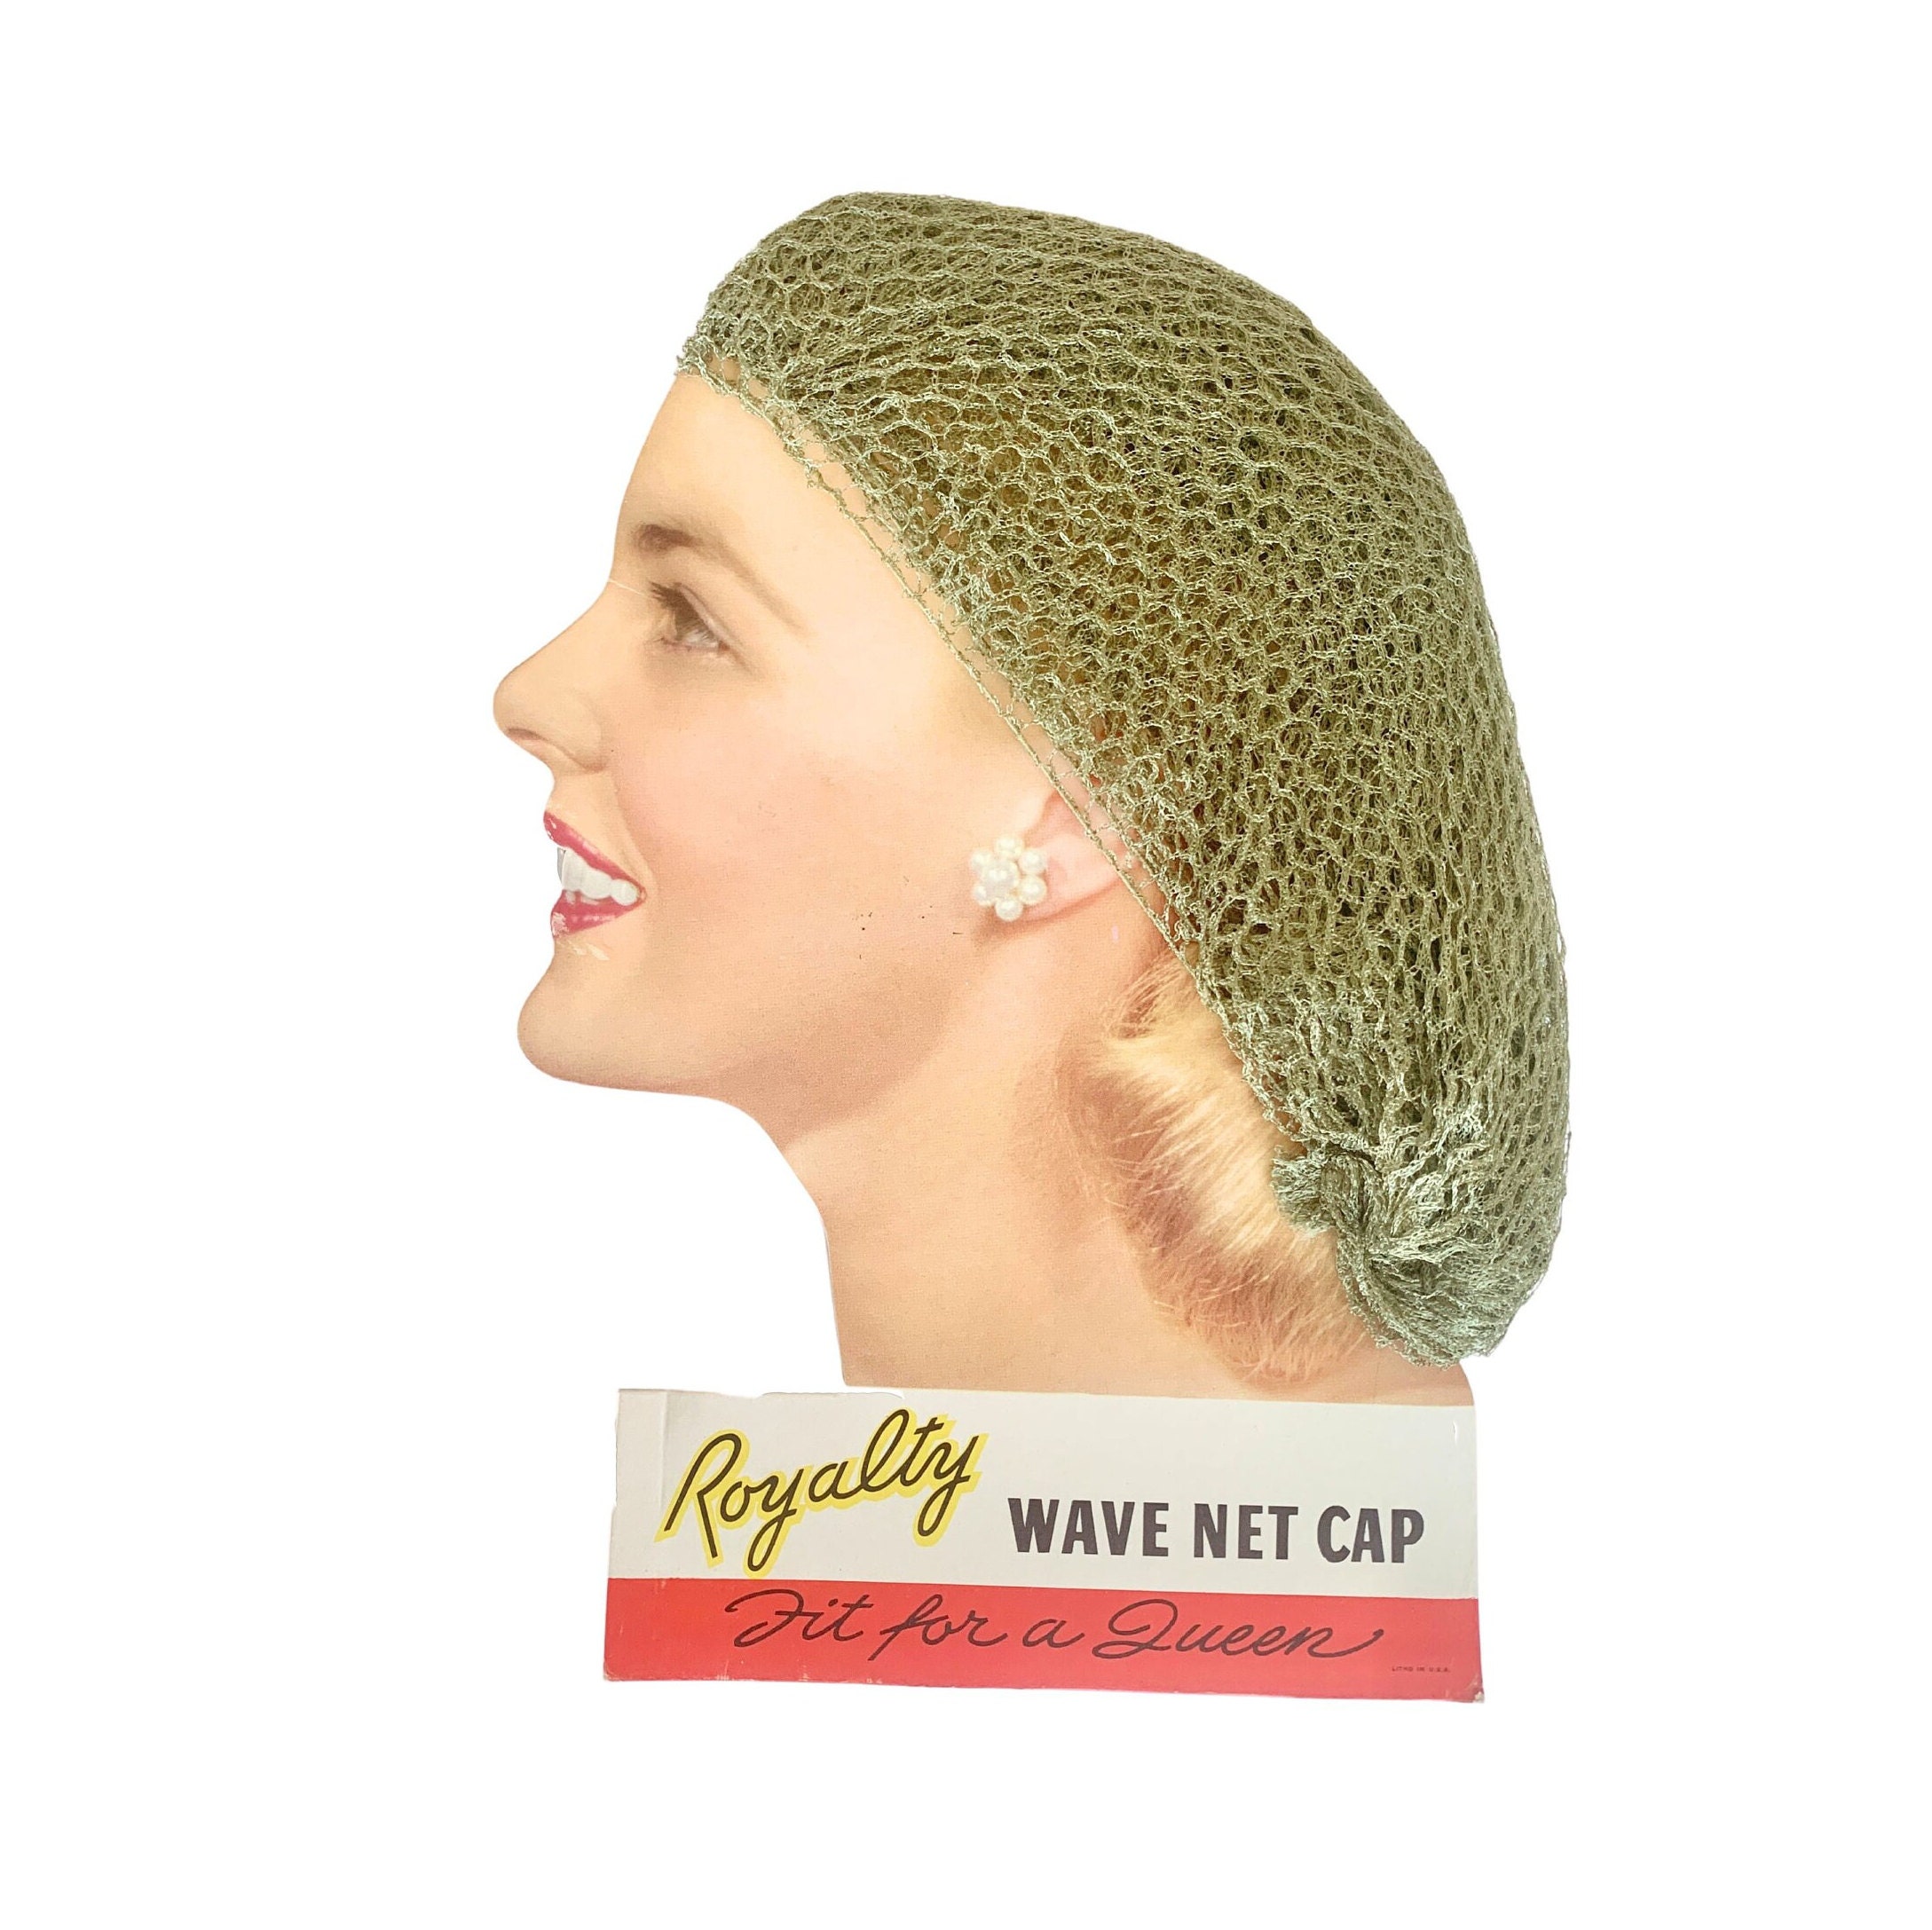  THRLIP Net Plopping Cap for Drying Curly Hair, Soft Bonnet Hair  Dryer Portable Attachment, Net Plopping Cap for Drying Curly Hair, Net  Plopping Cap (Color : 3pcs) : Beauty & Personal